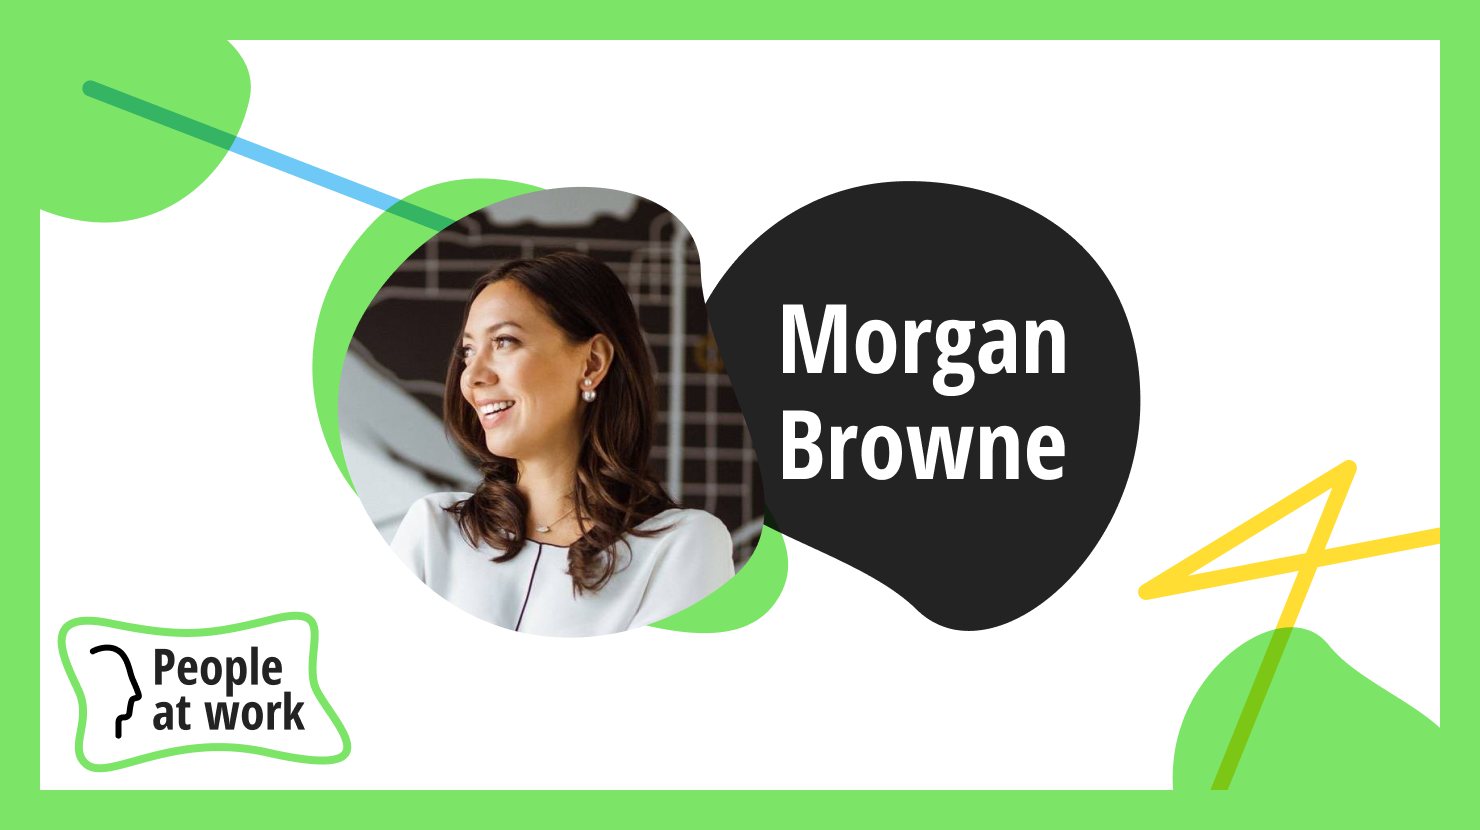 Starting with core values with Morgan Browne